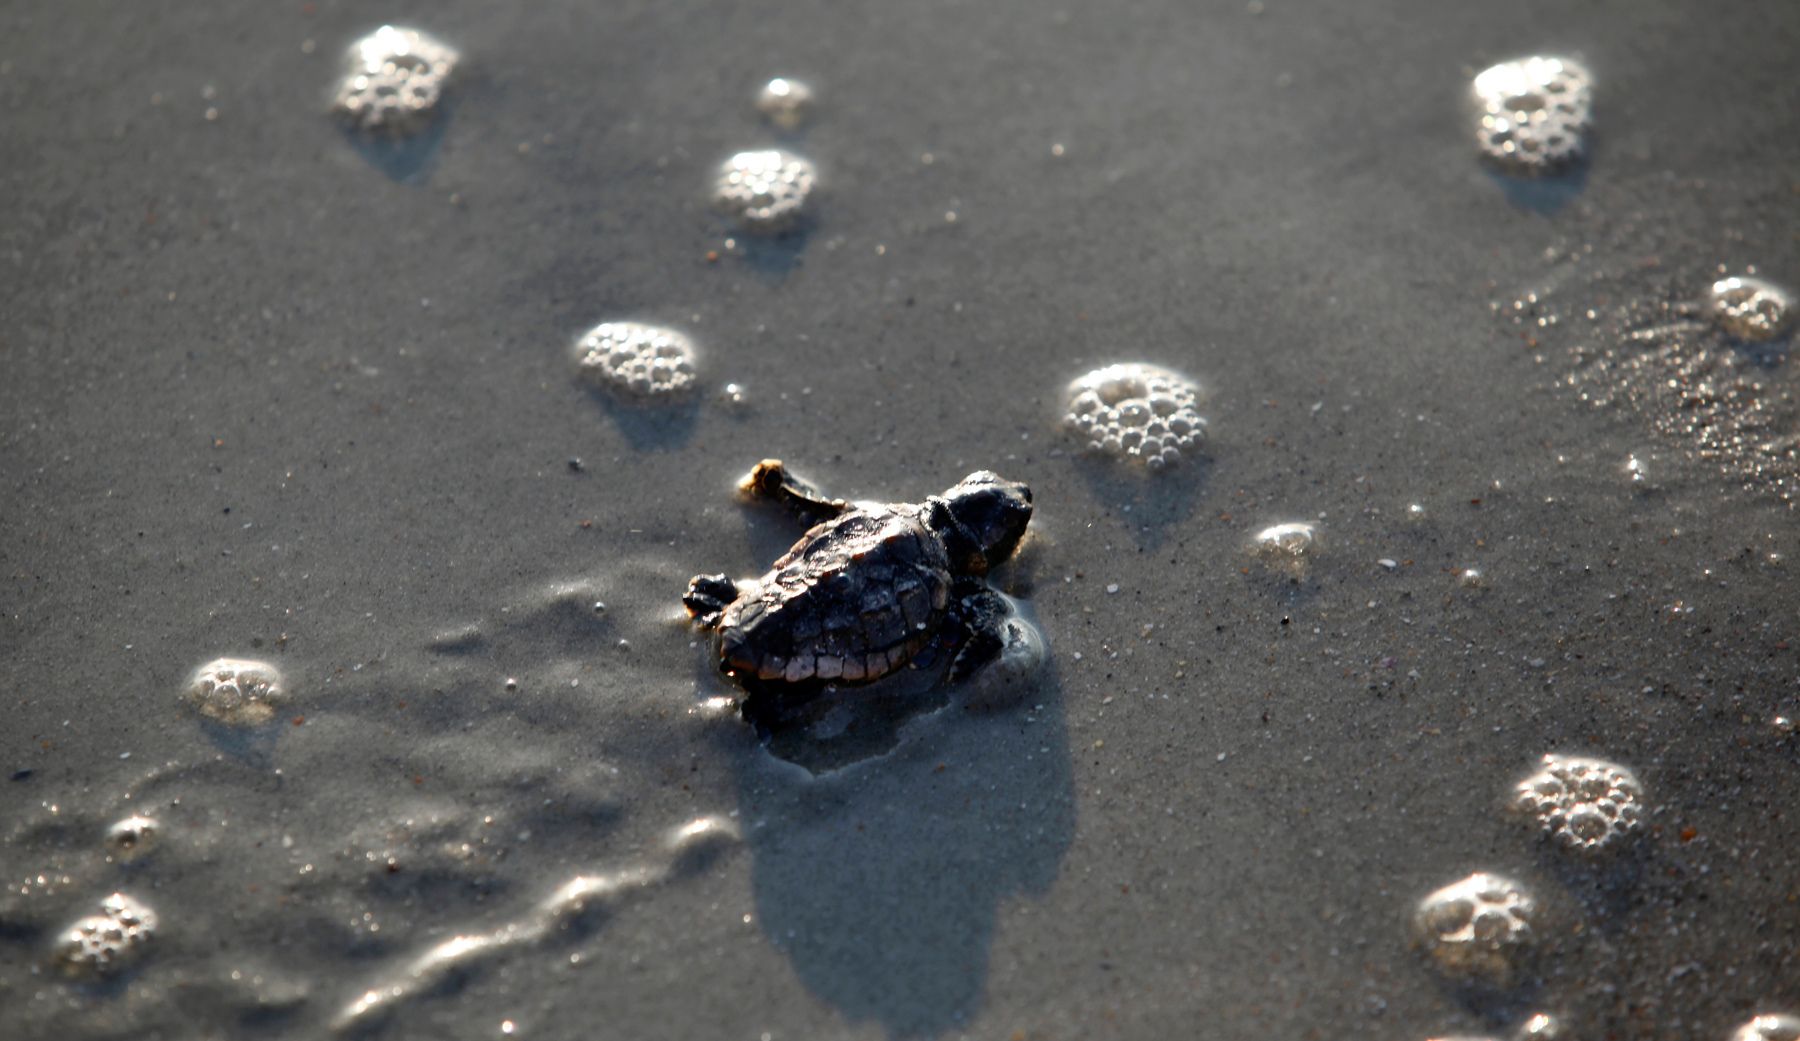 A Loggerhead sea turtle hatchling makes its way to the ocean after an inventory on Litchfield Beach, South Carolina August 17, 2012.REUTERS/Randall Hill